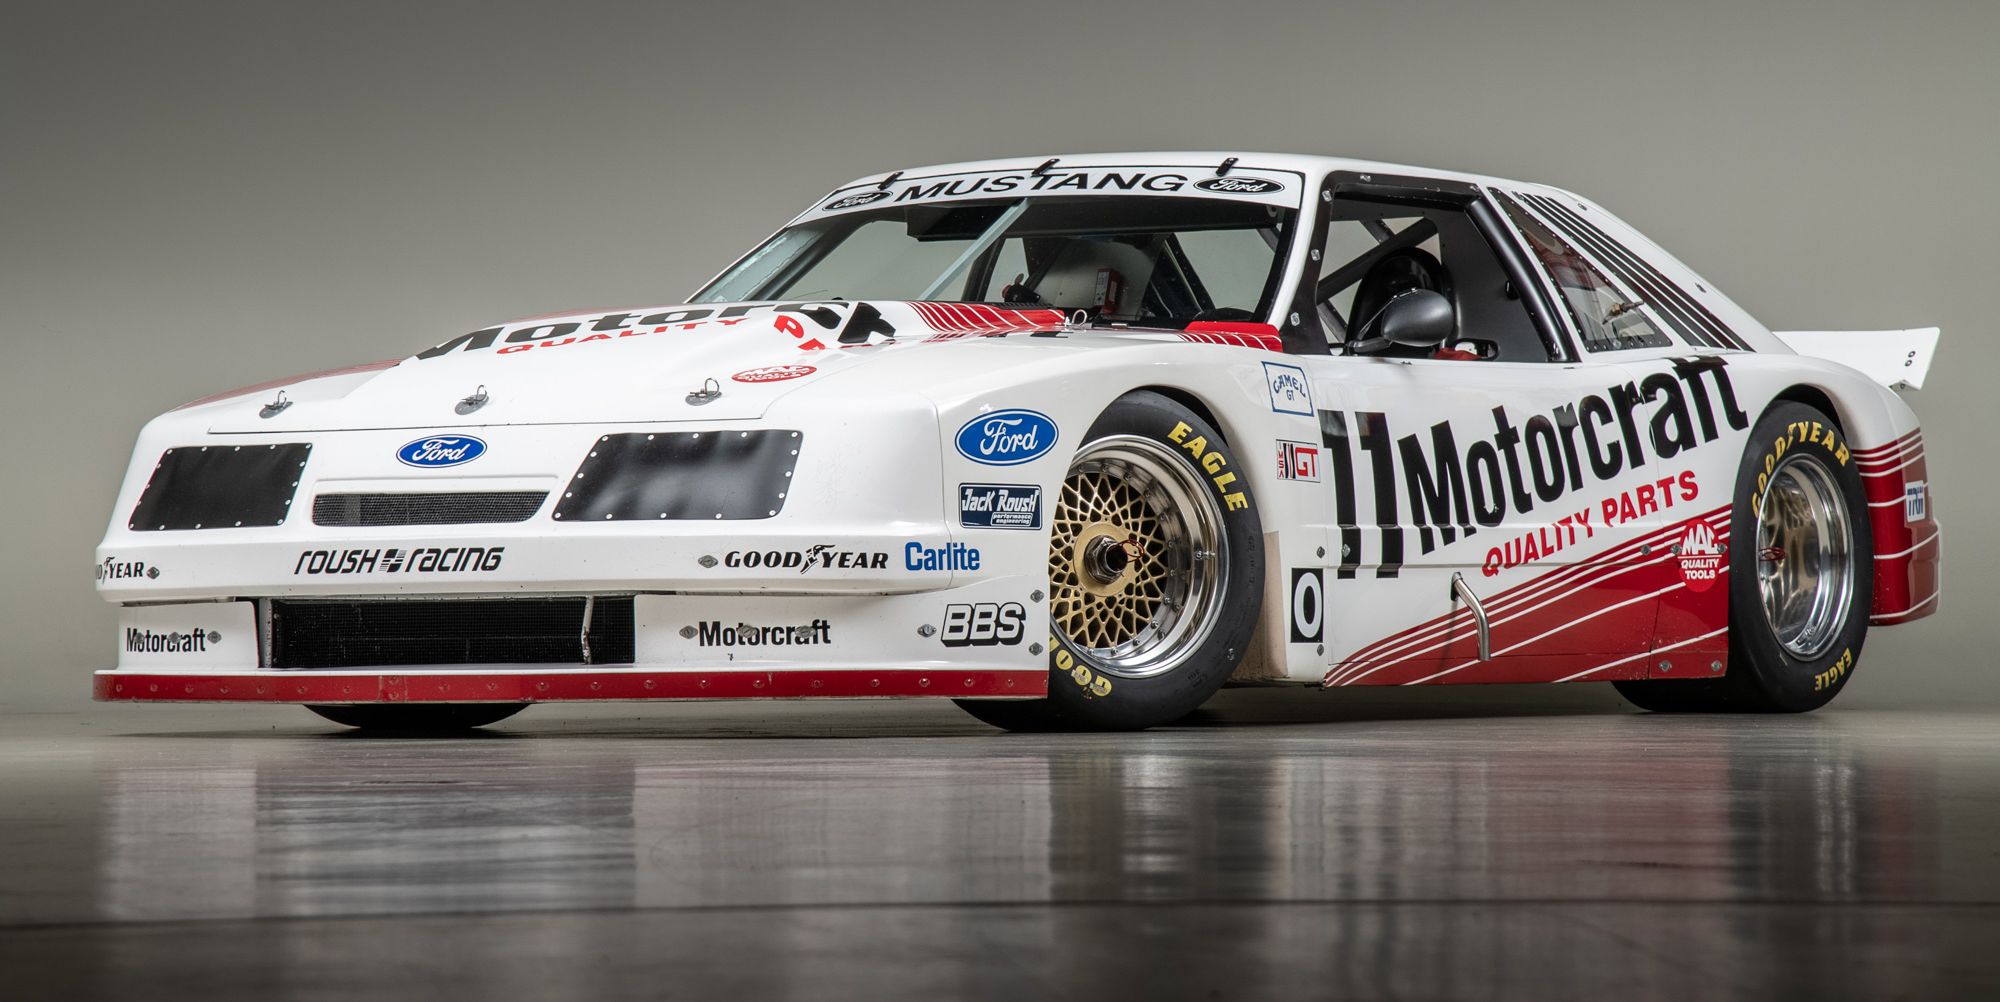 This Eighties Ford Mustang Race Car Might Be the Coolest Car On Sale Right Now